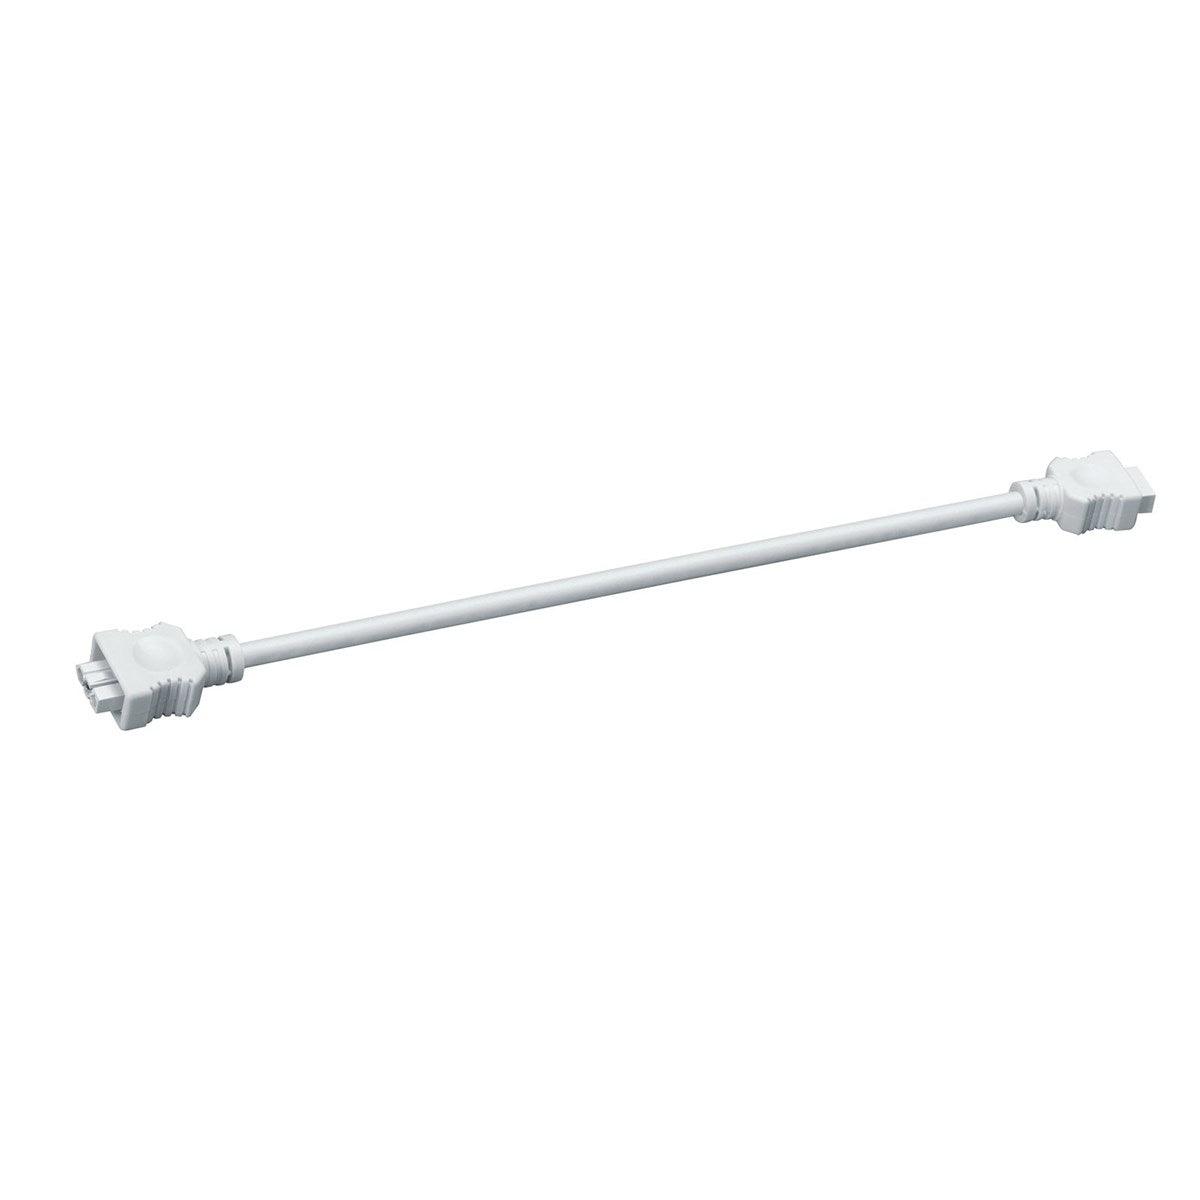 14in. Interconnect Cable for 6U Under cabinet lights, White